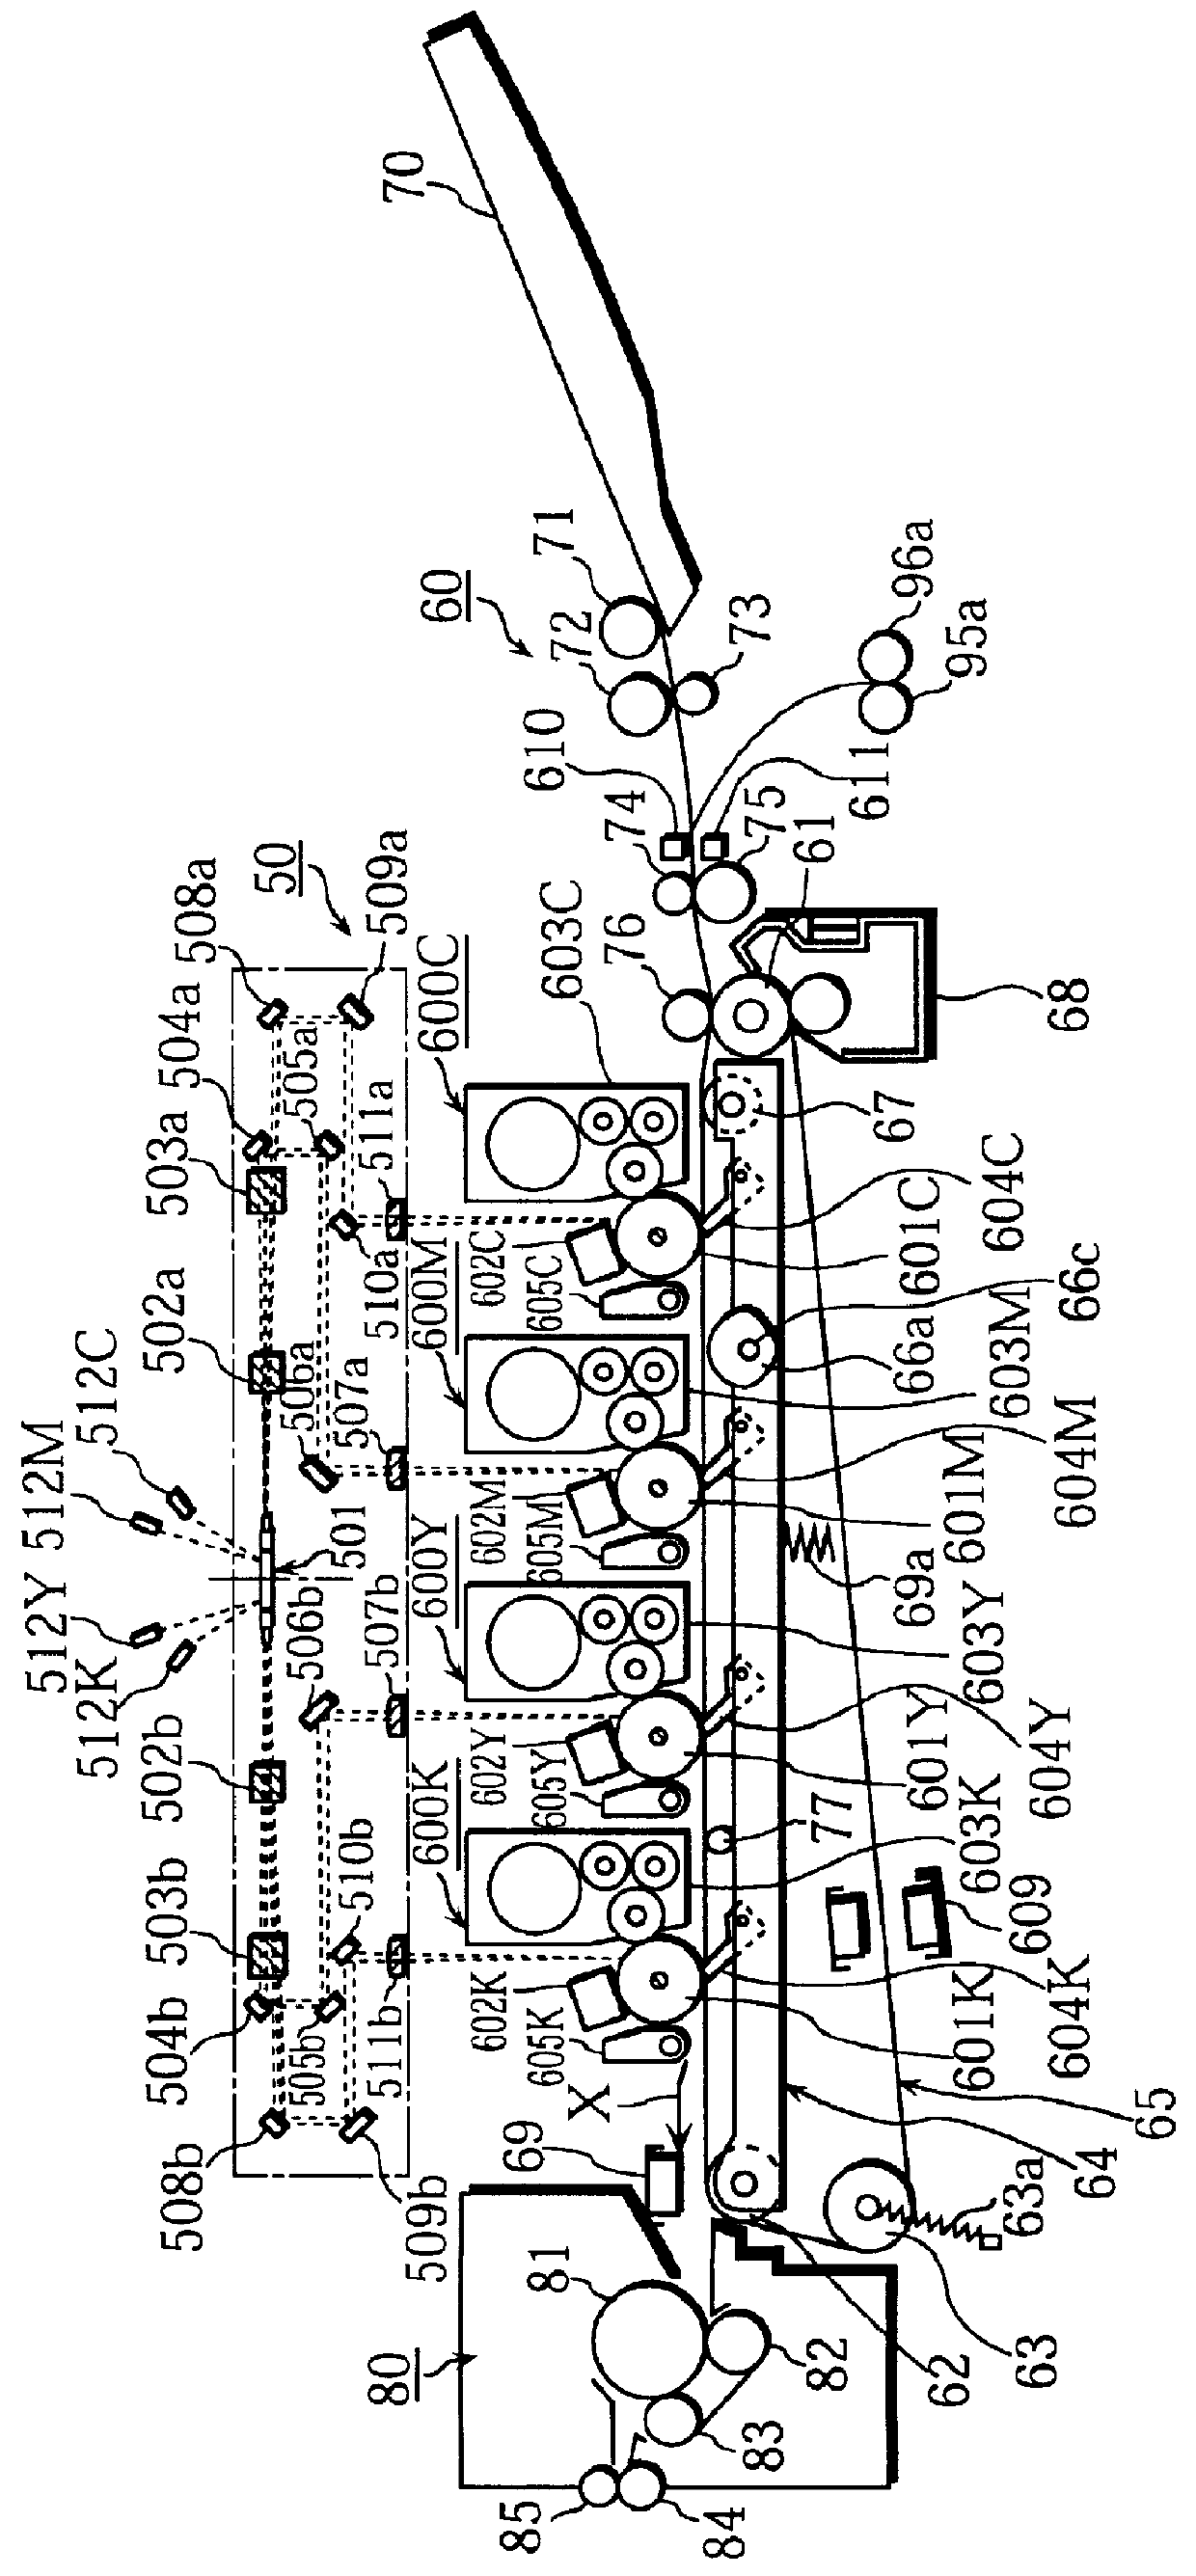 Image forming apparatus operating in color mode and monochrome mode